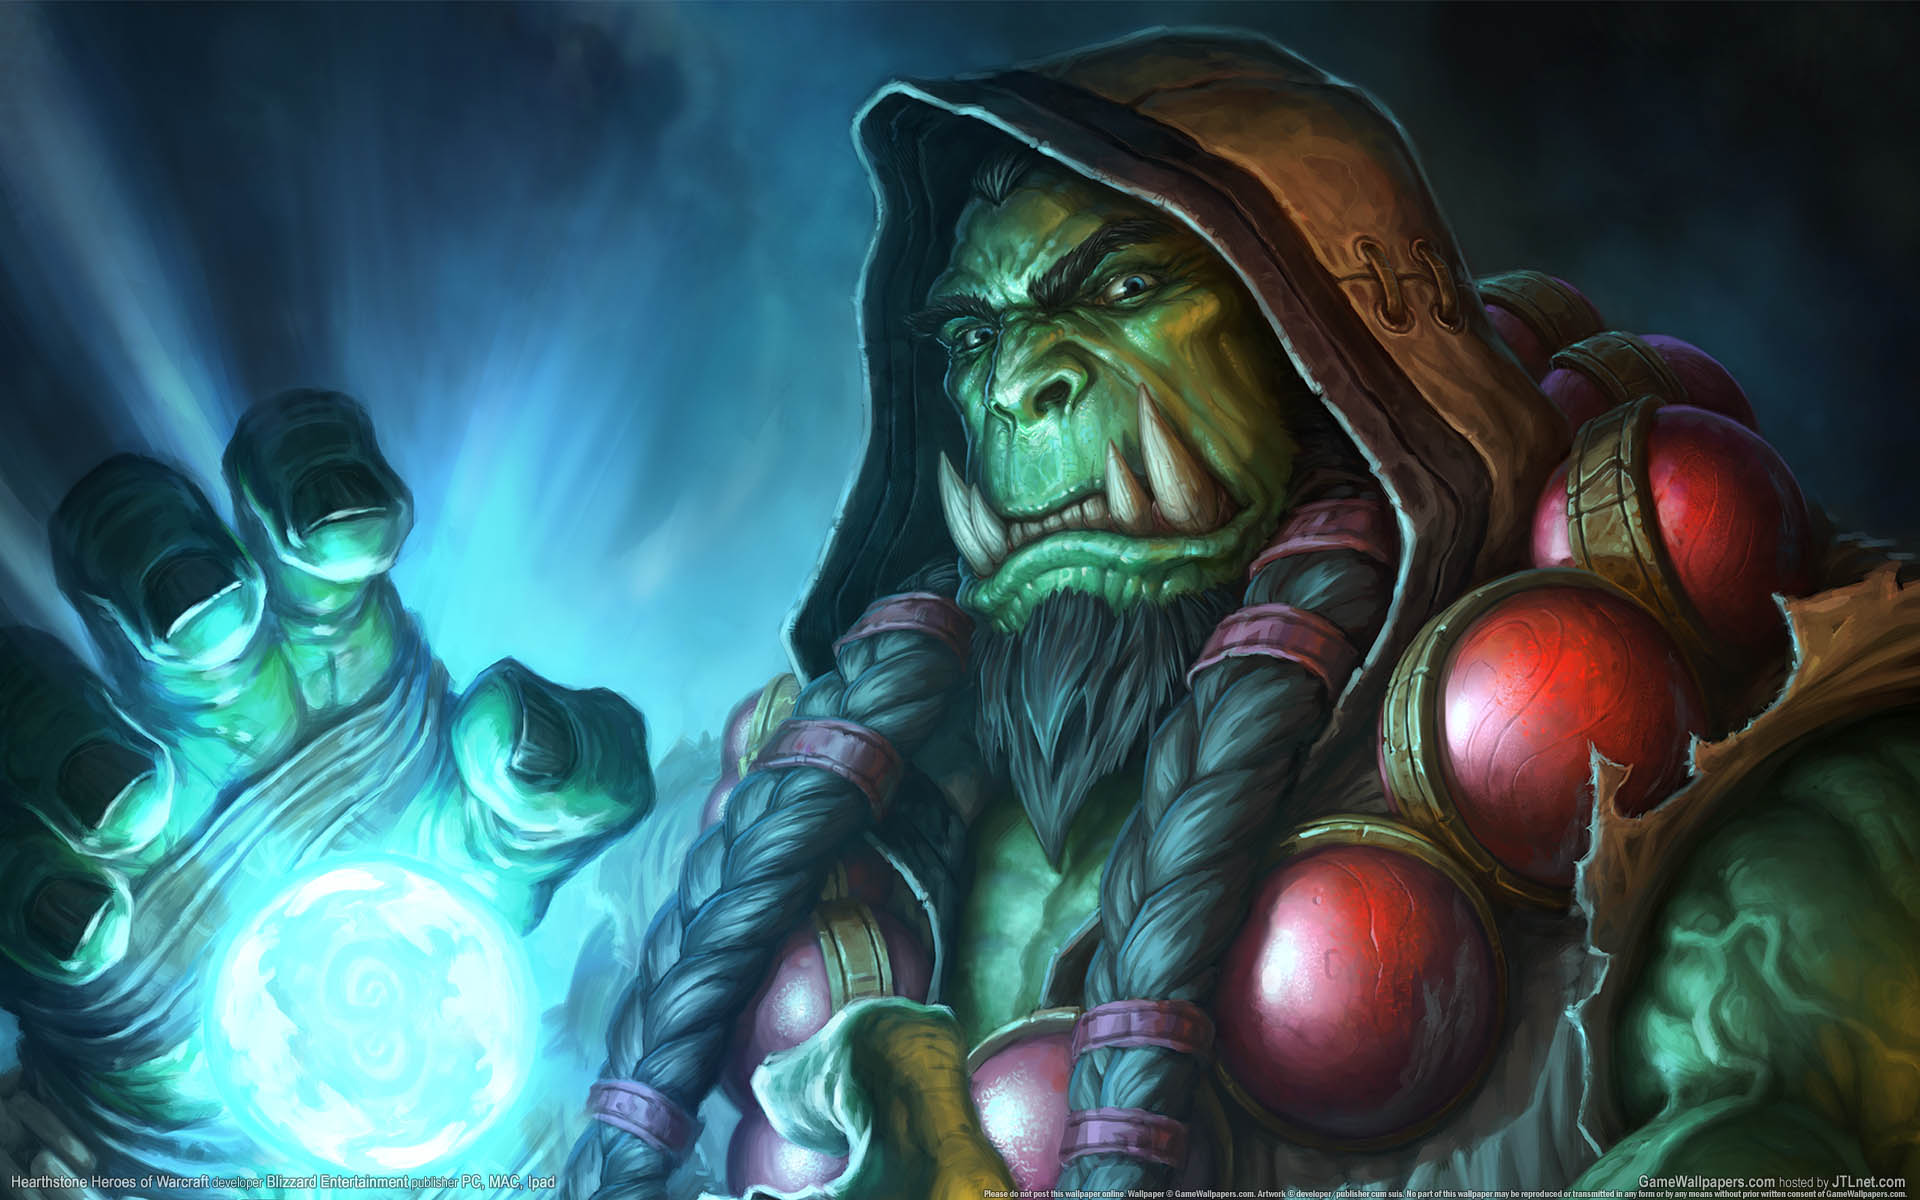 Hearthstone%3A Heroes of Warcraft wallpaper 02 1920x1200